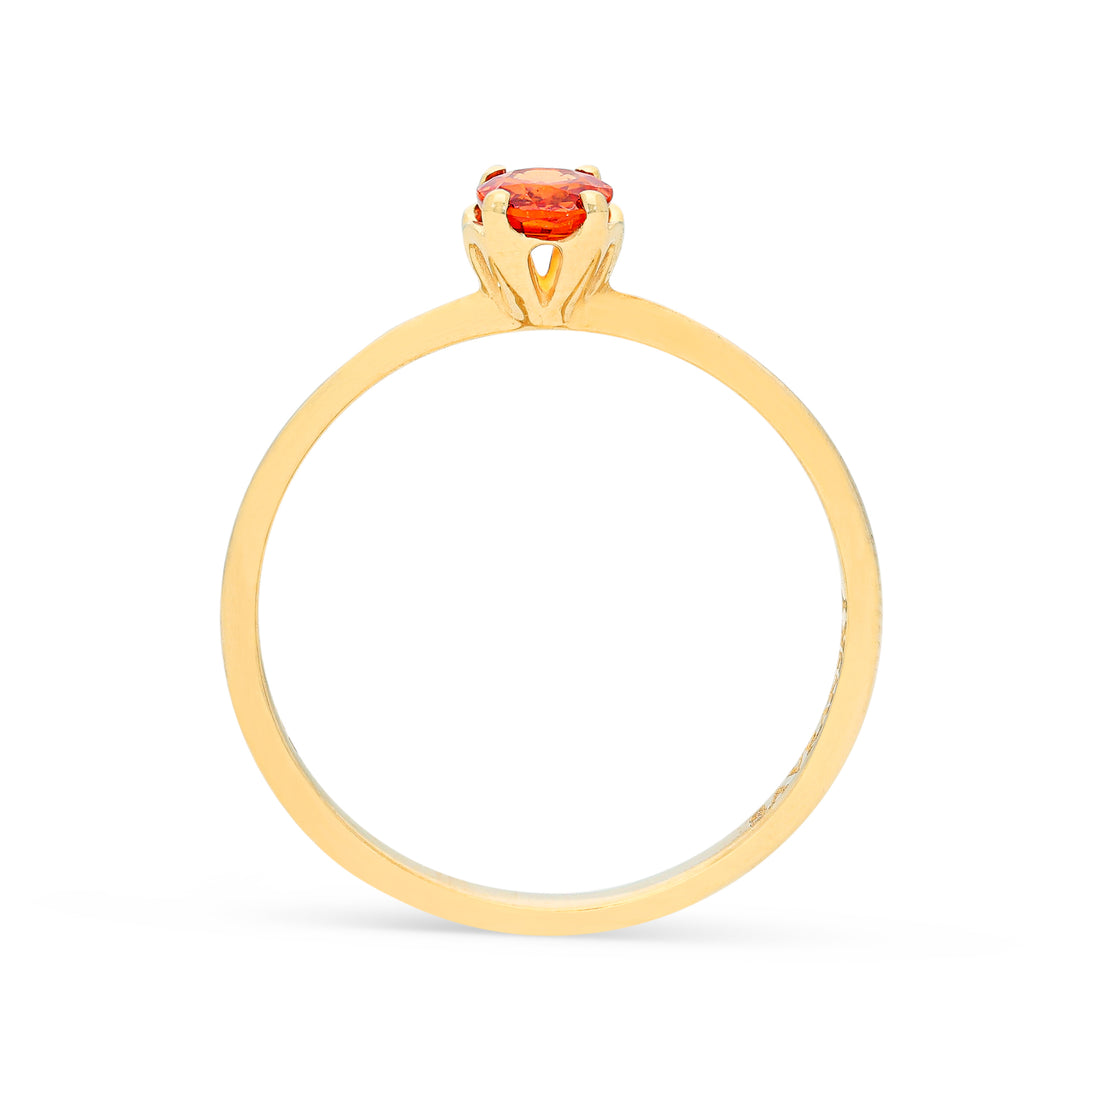 Natural Oval Cut Orange Sapphire Ring